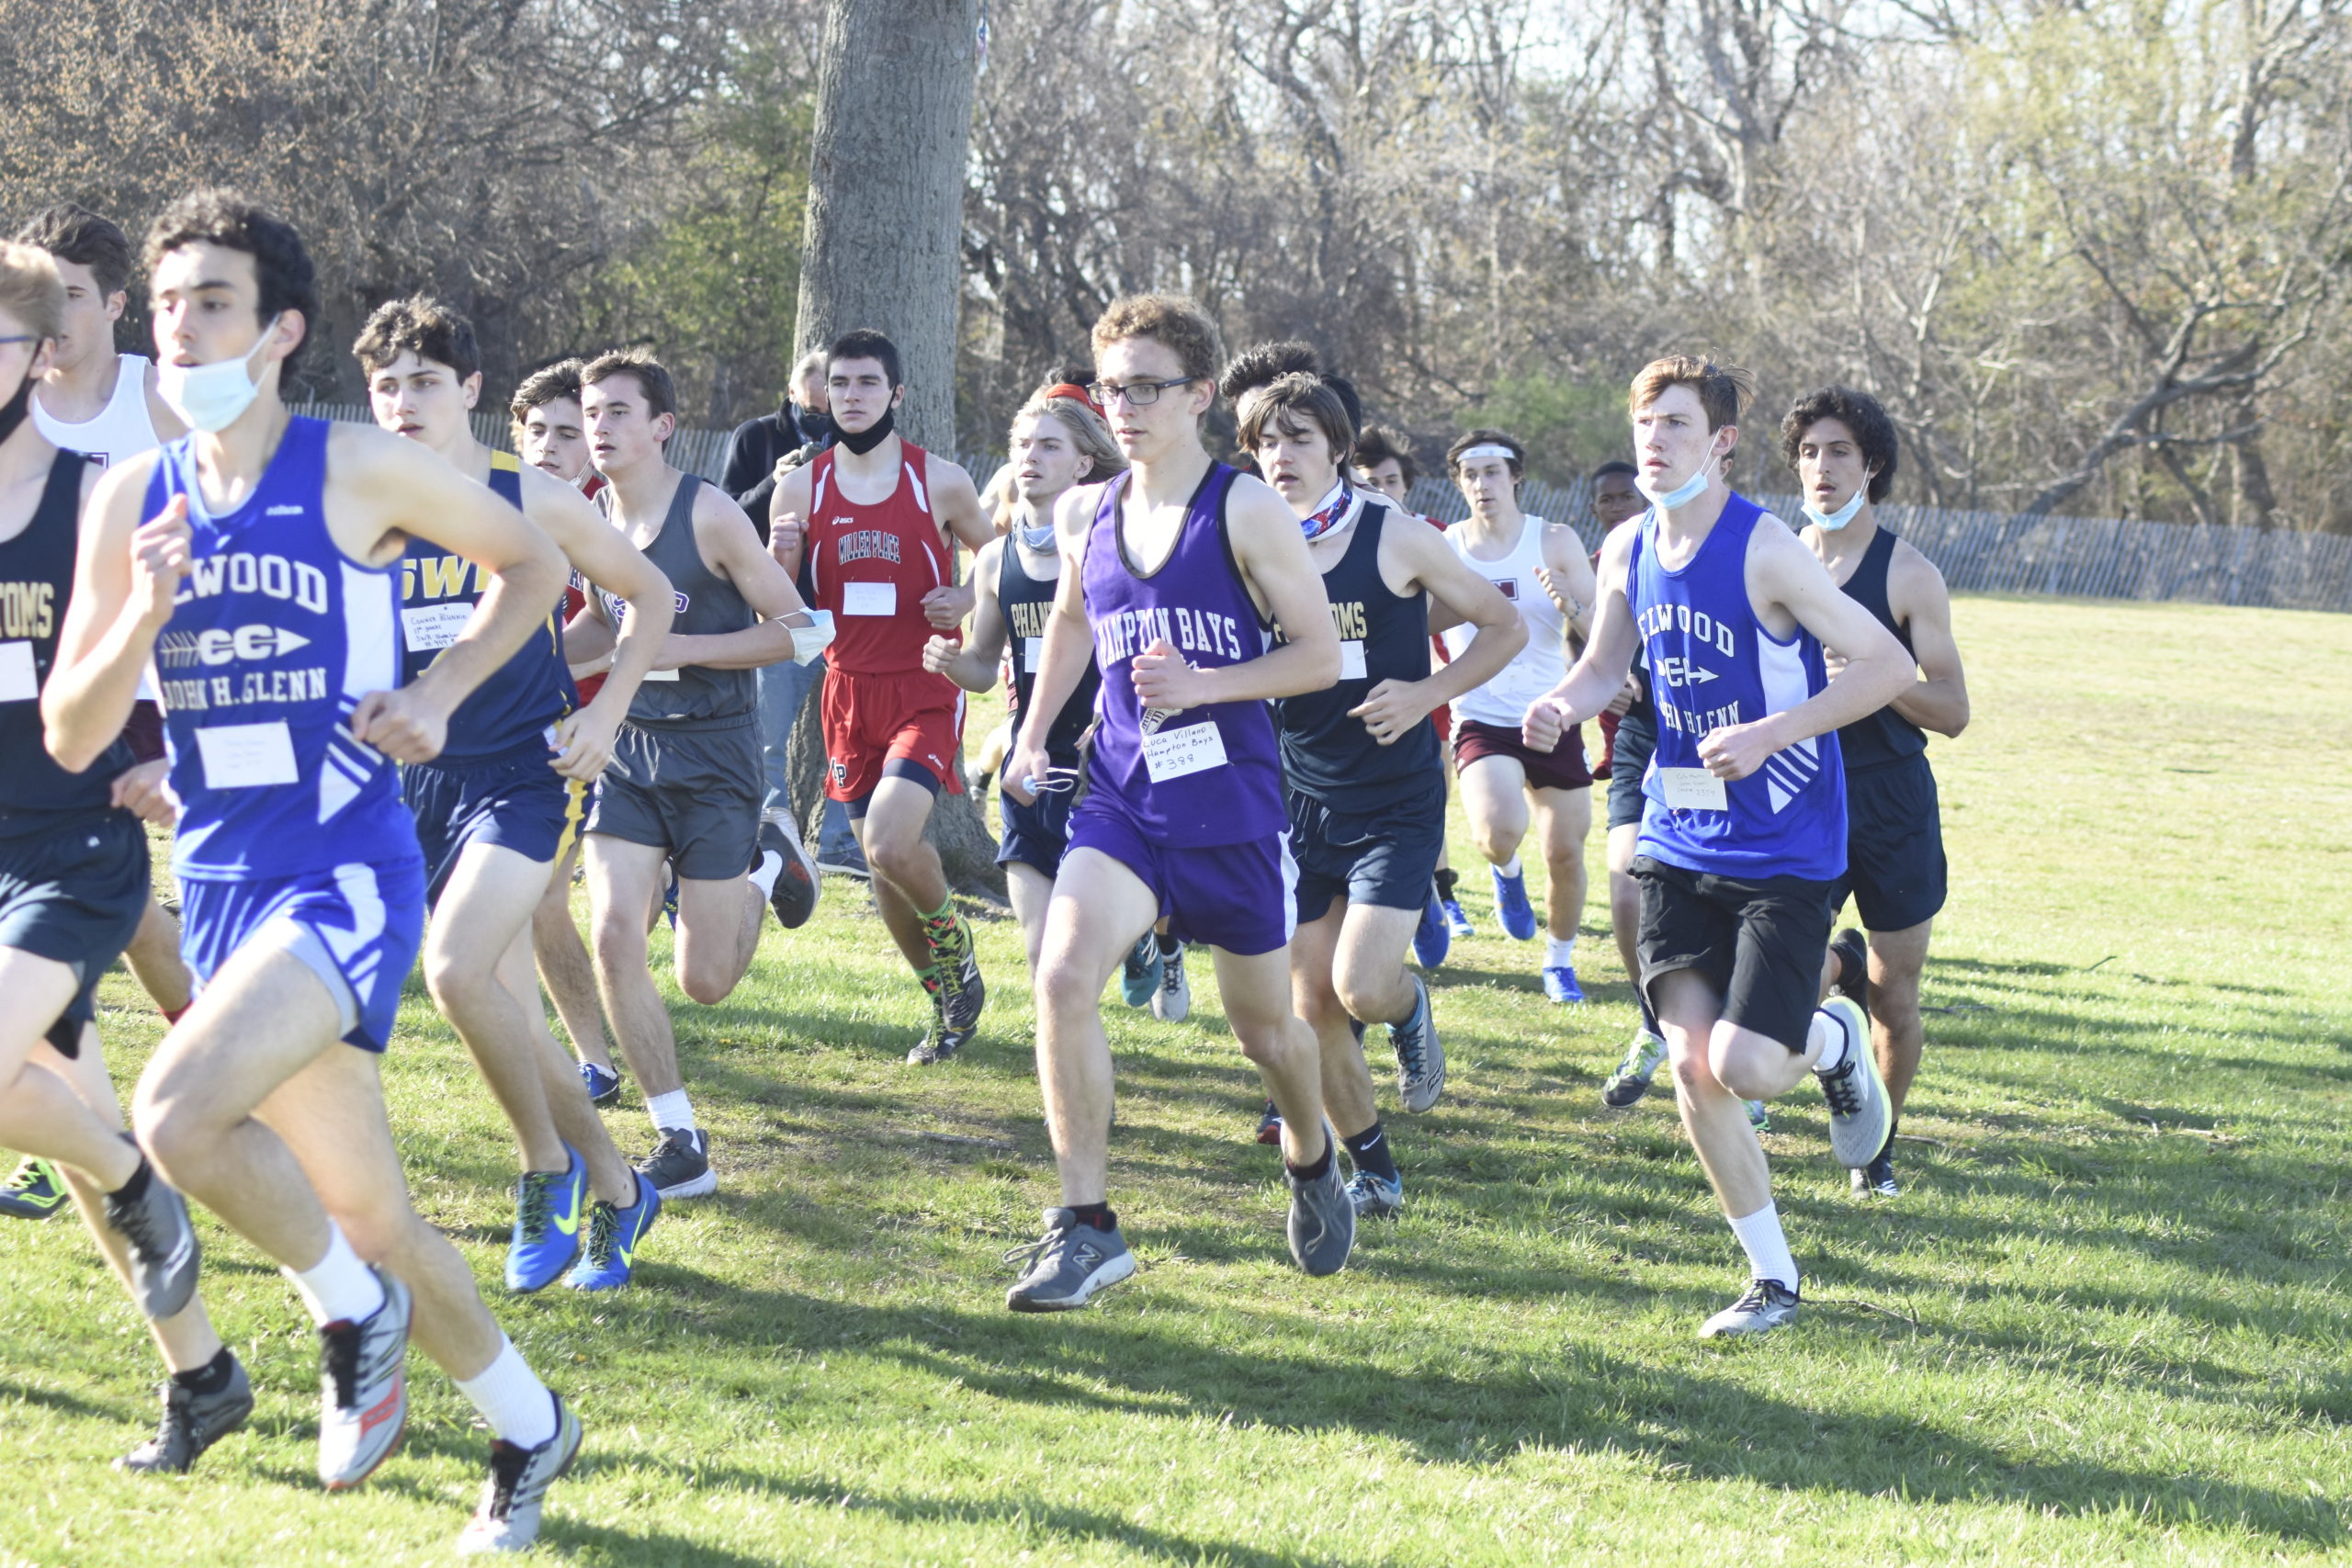 Luca Villano was the lone representative for Hampton Bays at Tuesday's Division IV race.